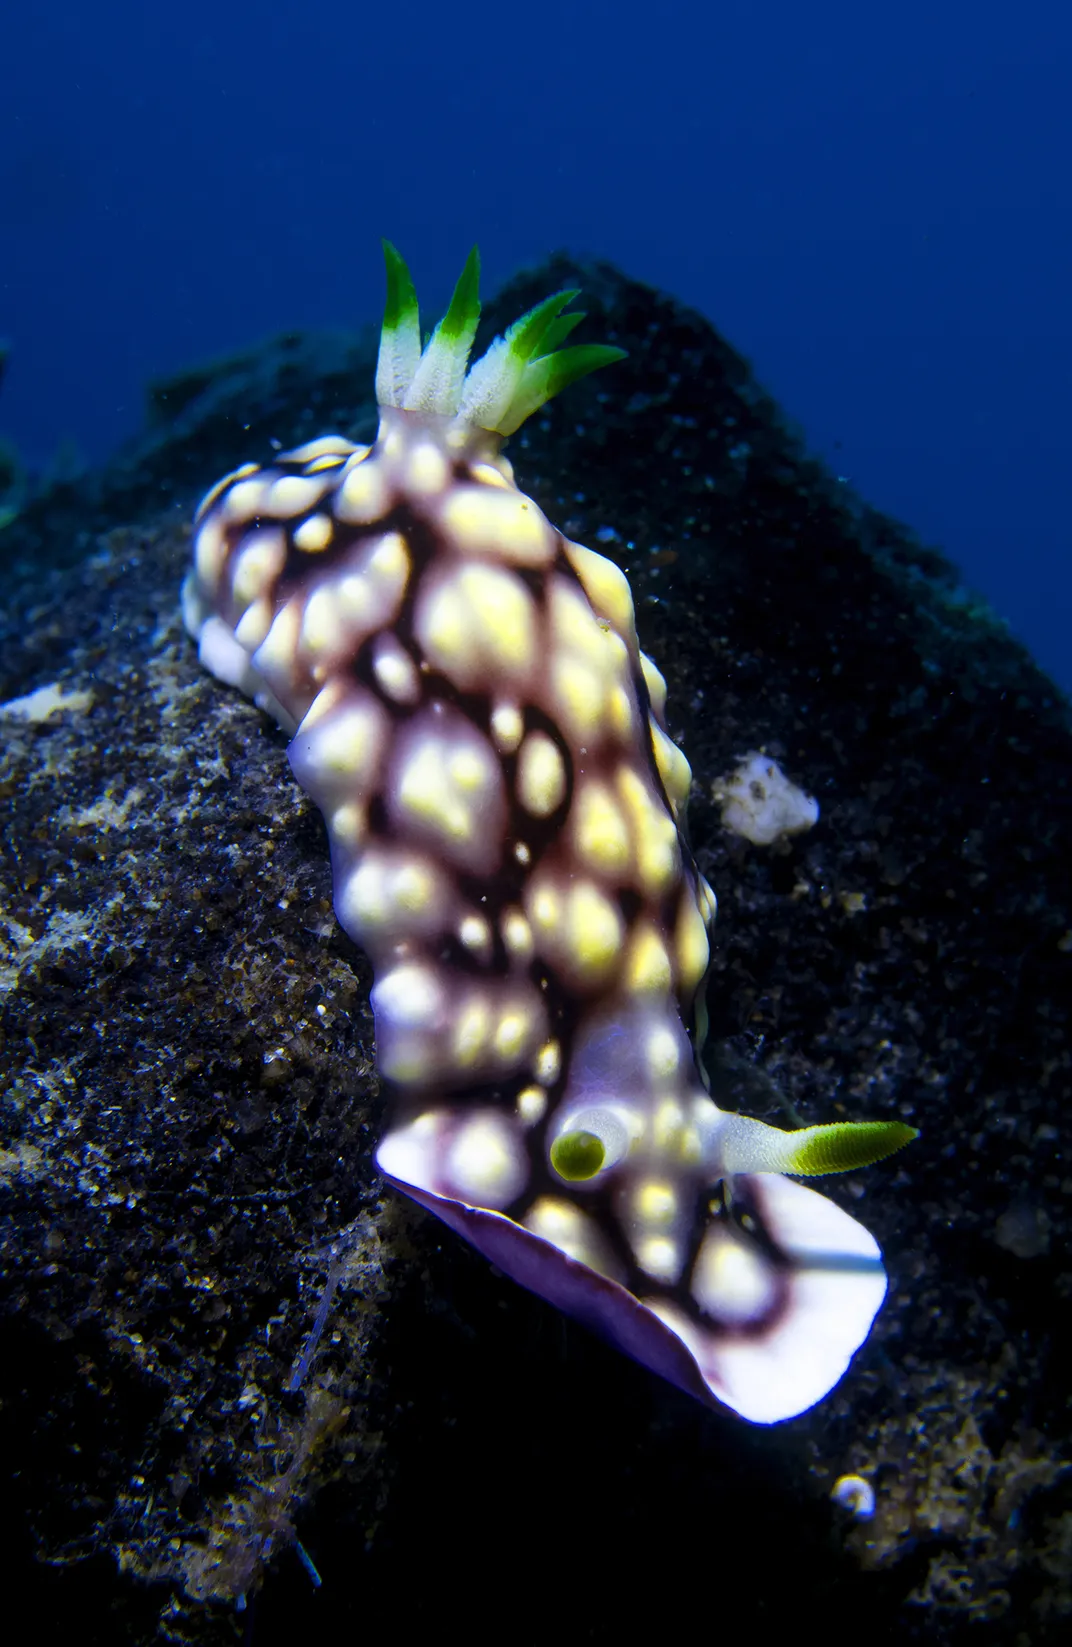 Goniobranchus geometricus resembles an inch-long purple pineapple under the sea. The green parts of the slug are its gills and sensory receptor organs.